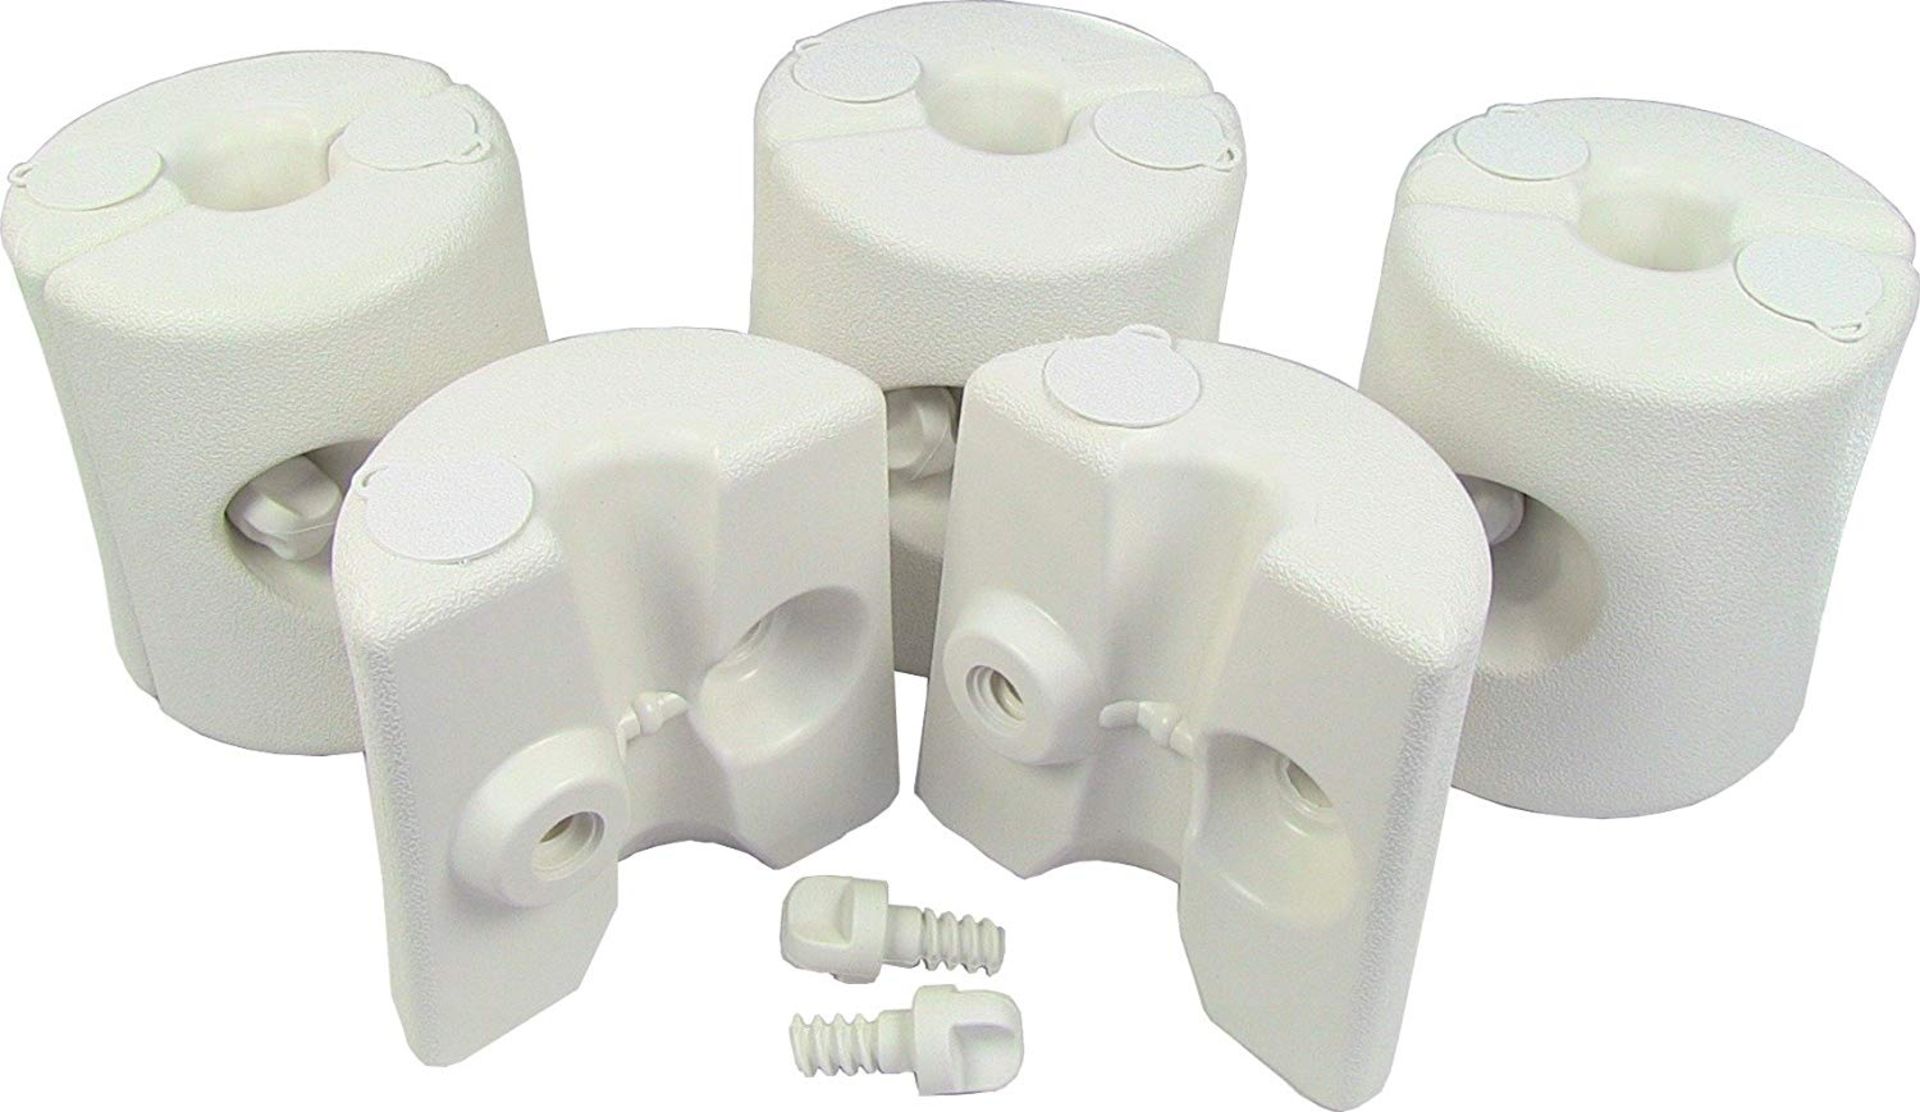 V Brand New DG Set Of Four Gazebo Leg Weights (Fill With Sand Or Water) To Protect Your Gazebo